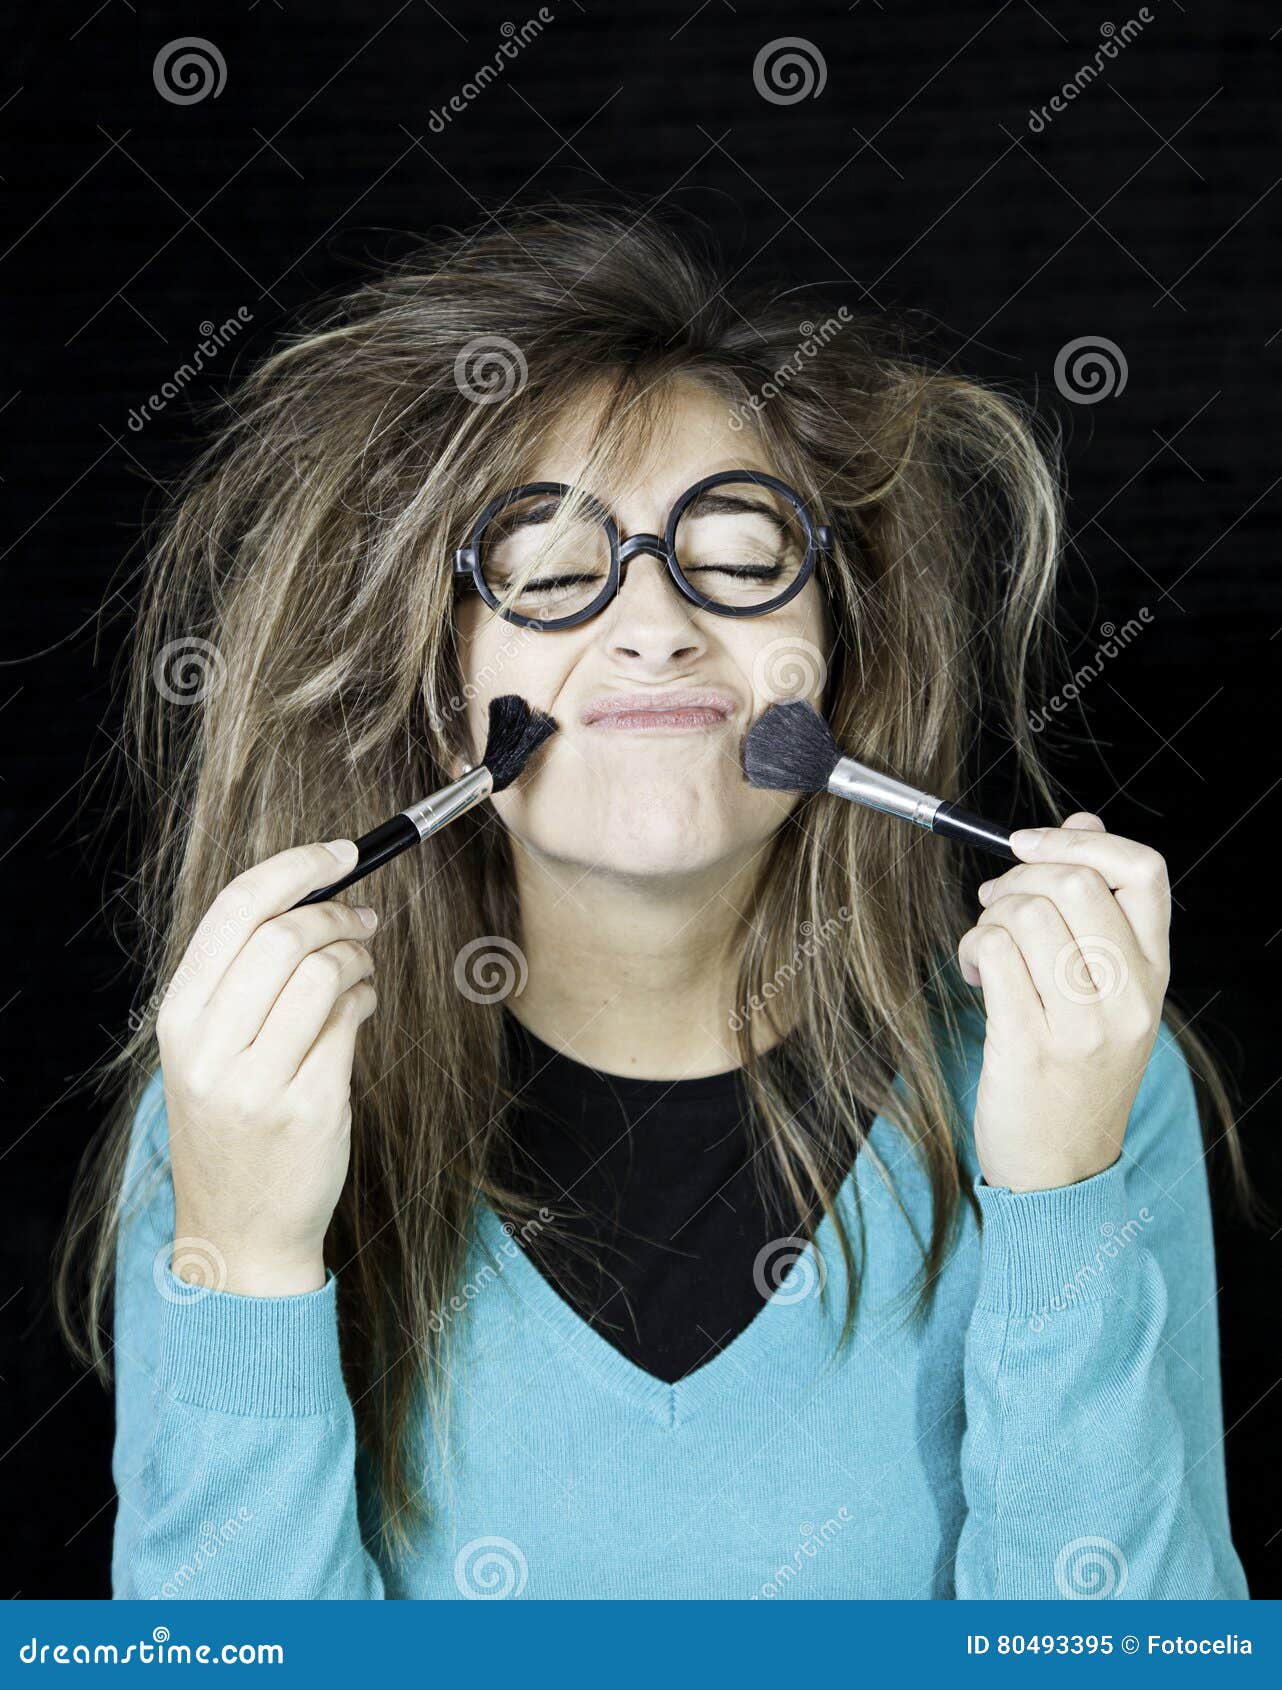 Nerdy makeup stock image. cosmetic, care -